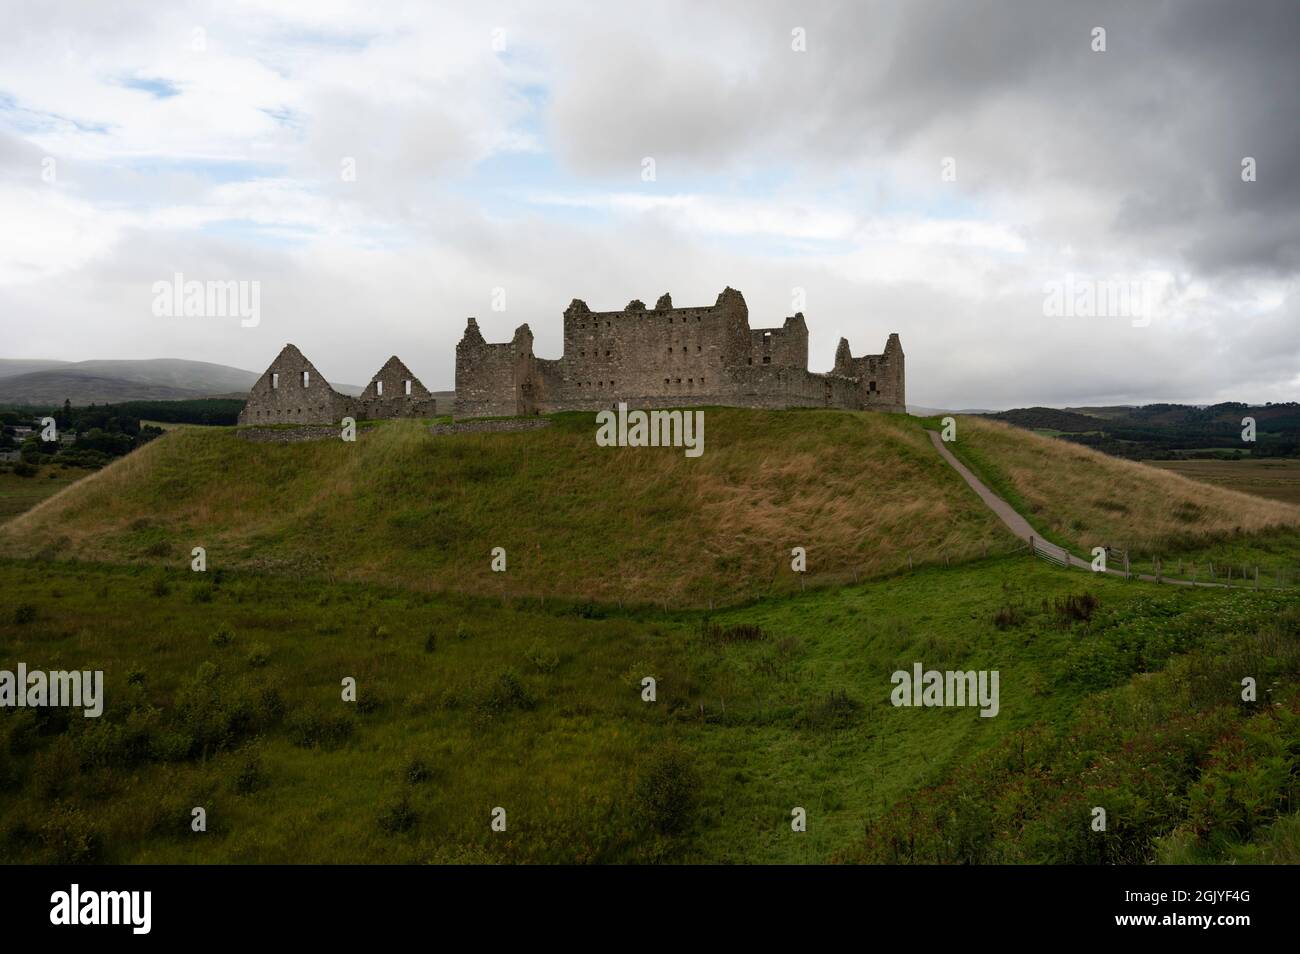 The ruins of Ruthven Barracks in the Scottish Highlands. Path leading to building which is on a hill. Blue sky and clouds, grassy area. Stock Photo